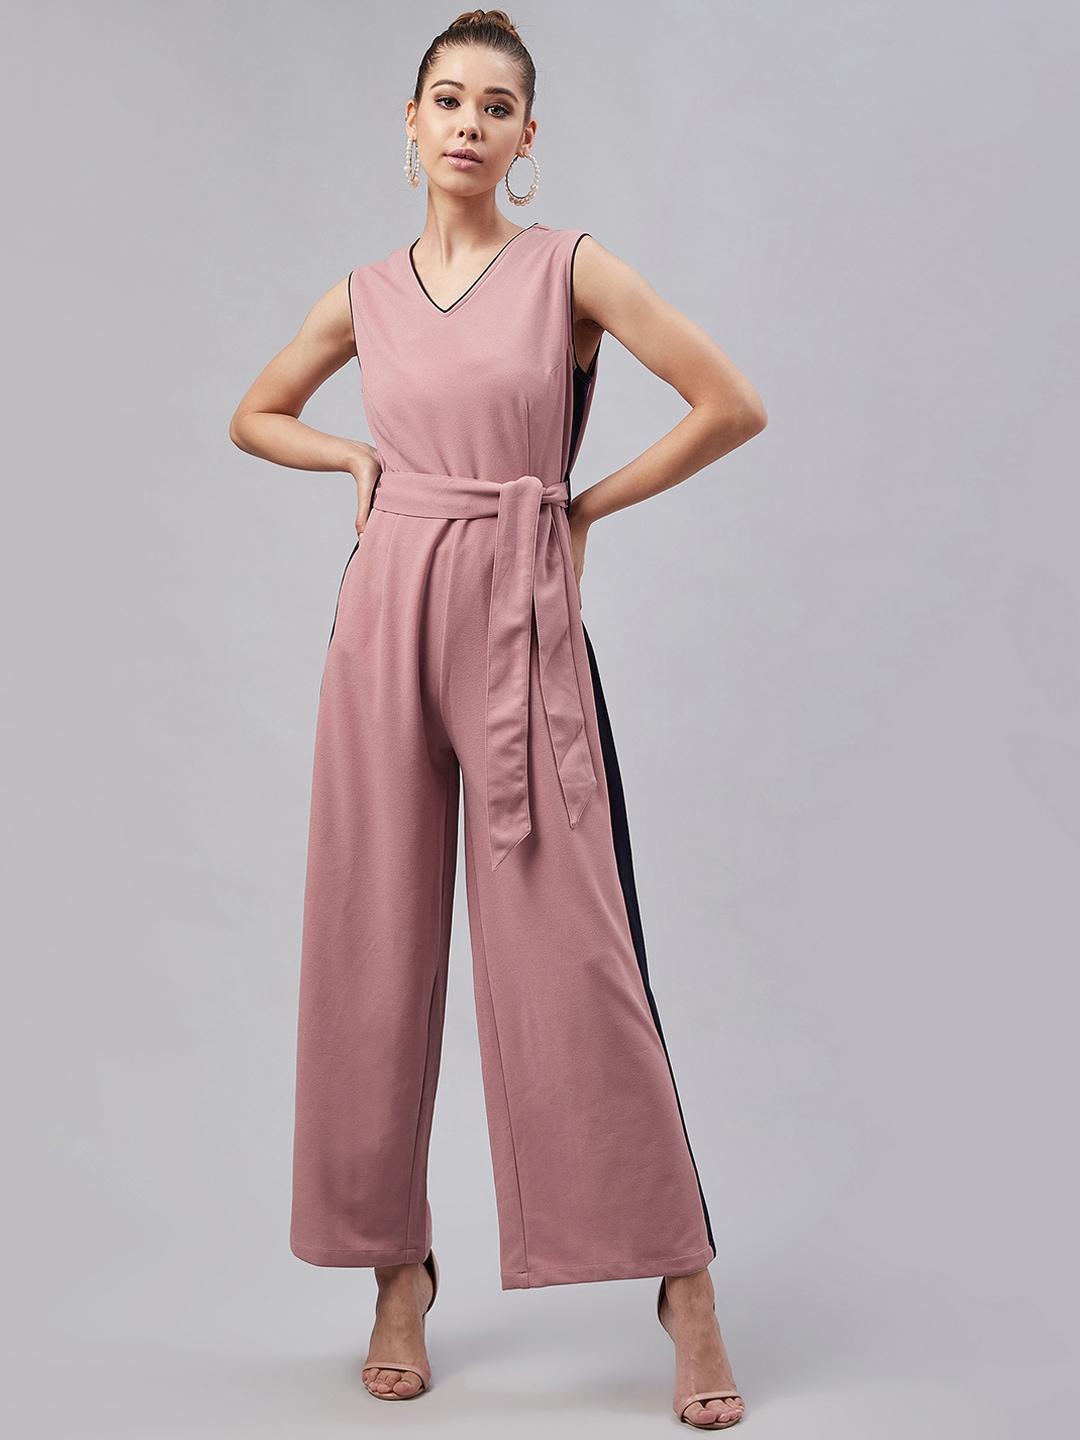 marie-claire-women-pink-&-navy-blue-solid-basic-jumpsuit